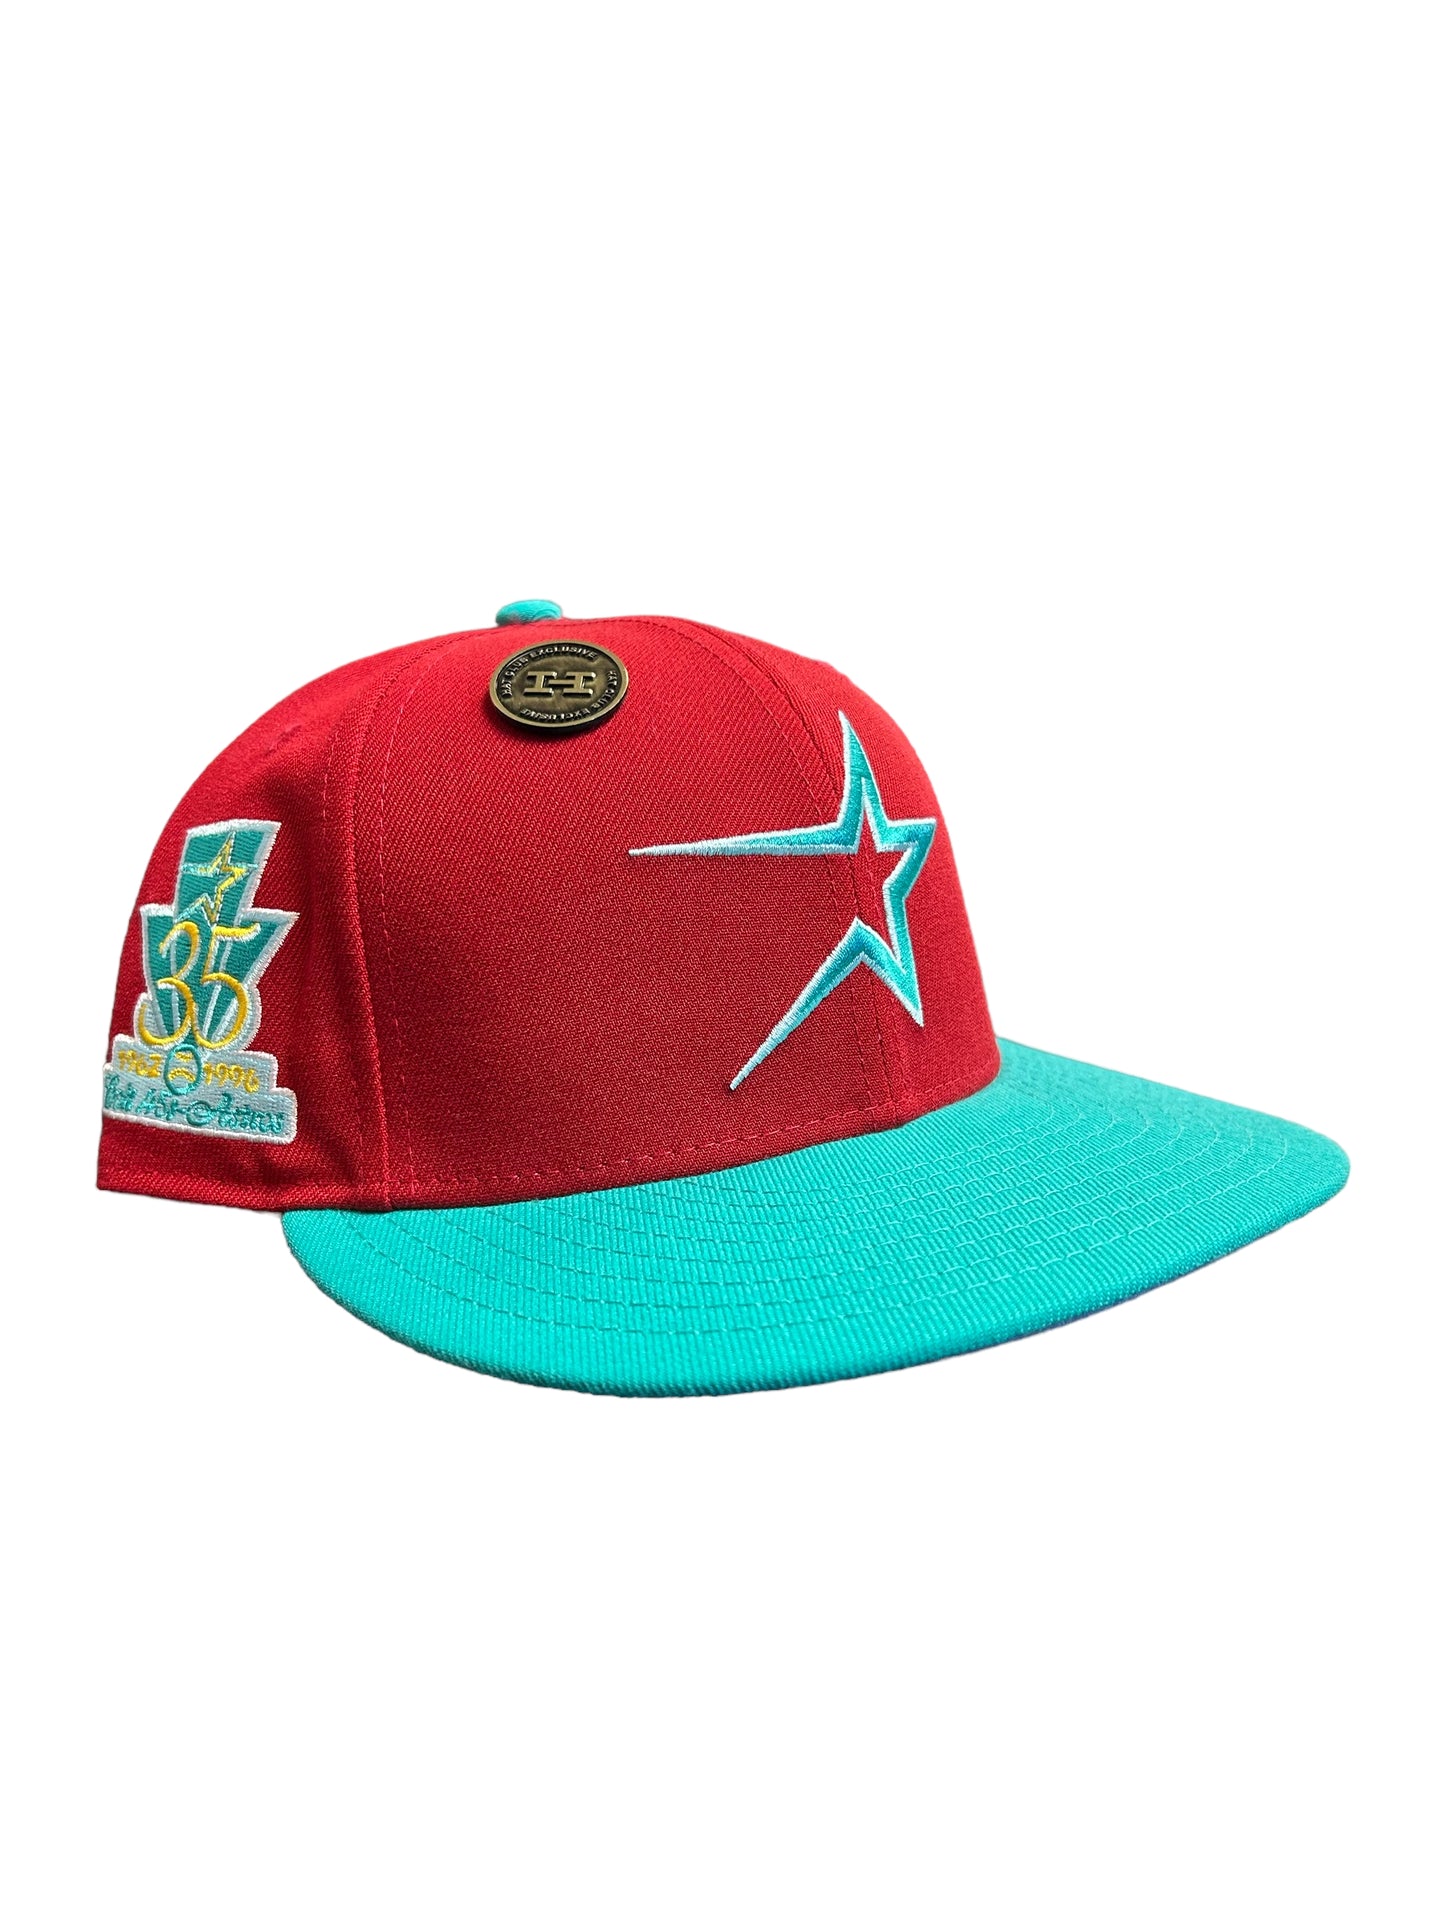 Houston Astros Red/Teal Hat